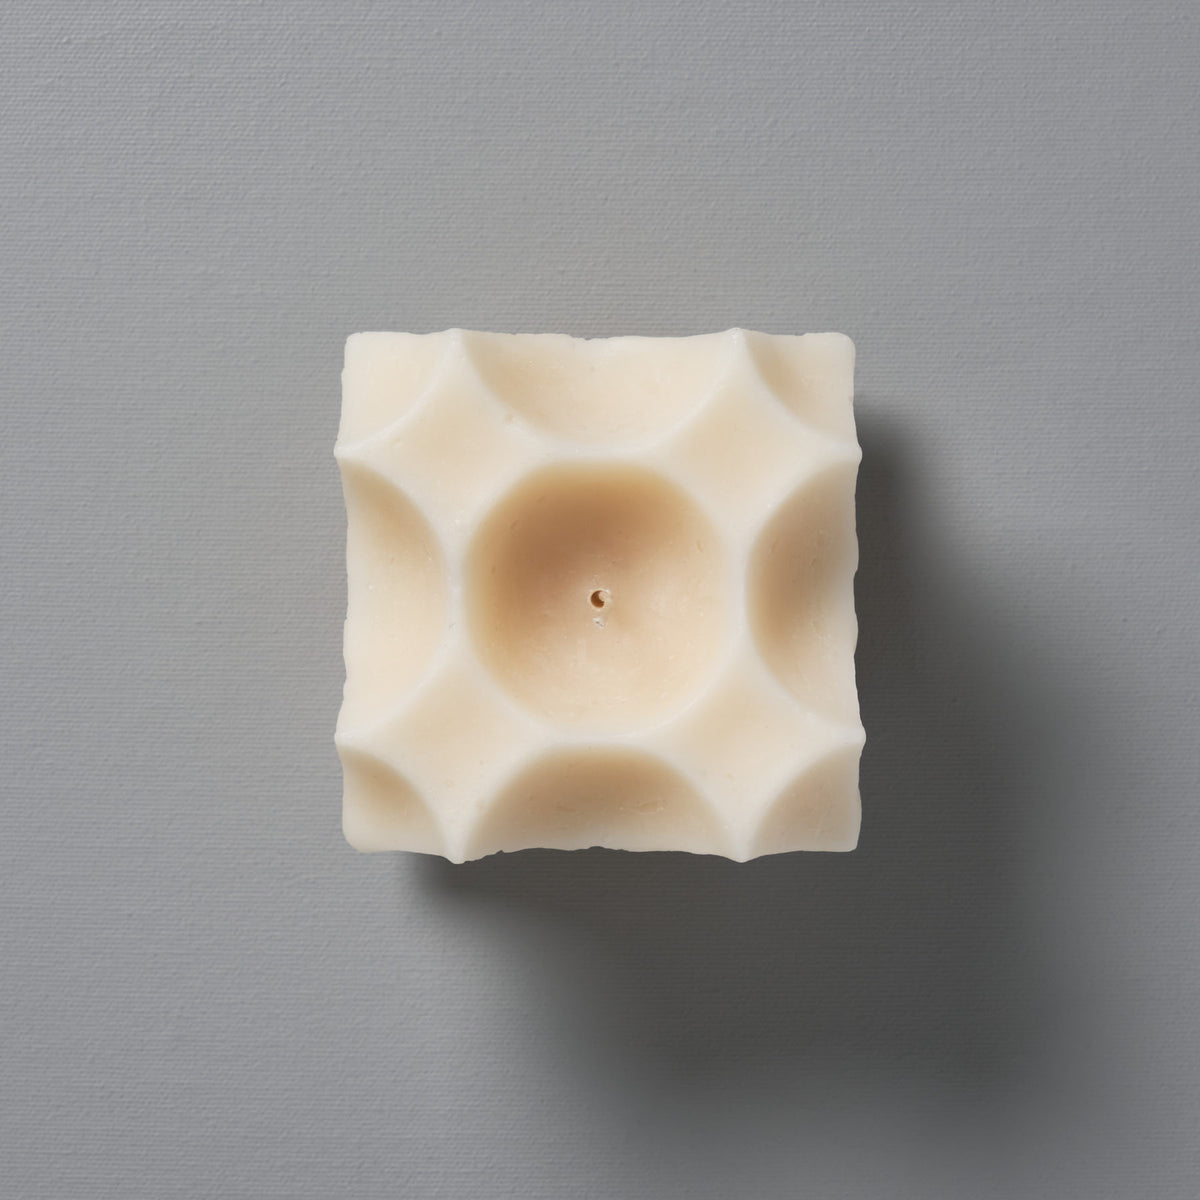 A Crux Candle by Andrej Urem, on a gray background.